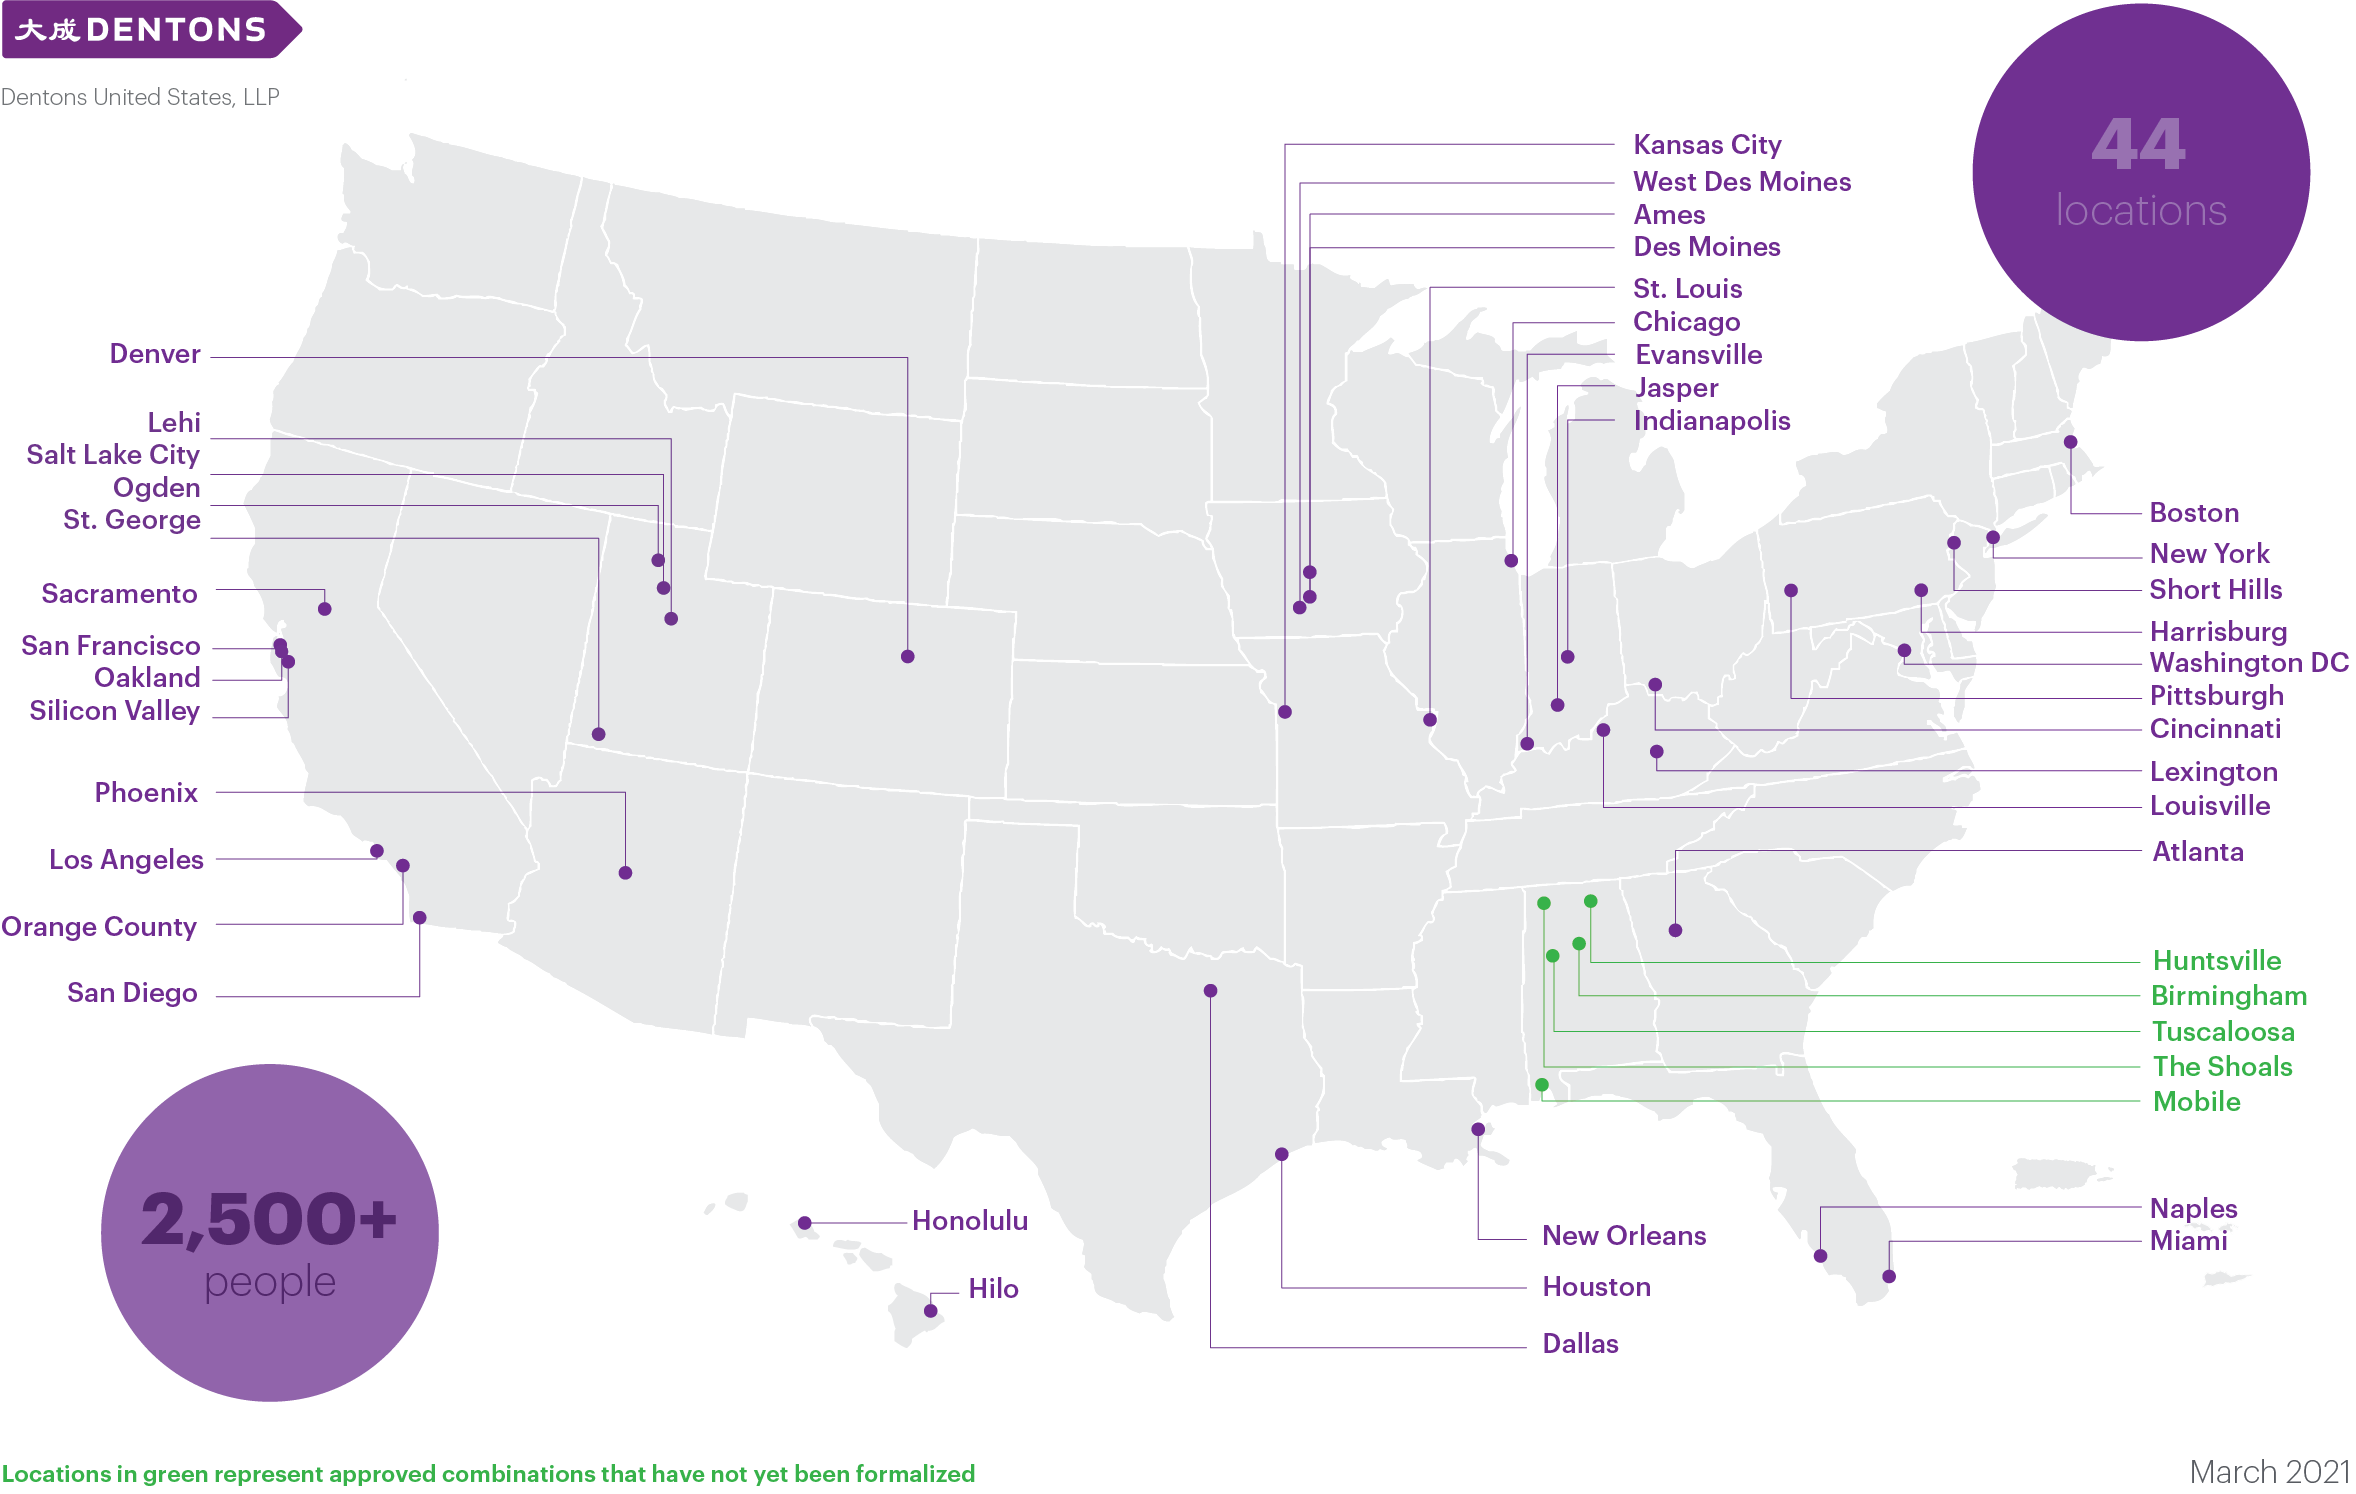 Dentons United States Locations Map